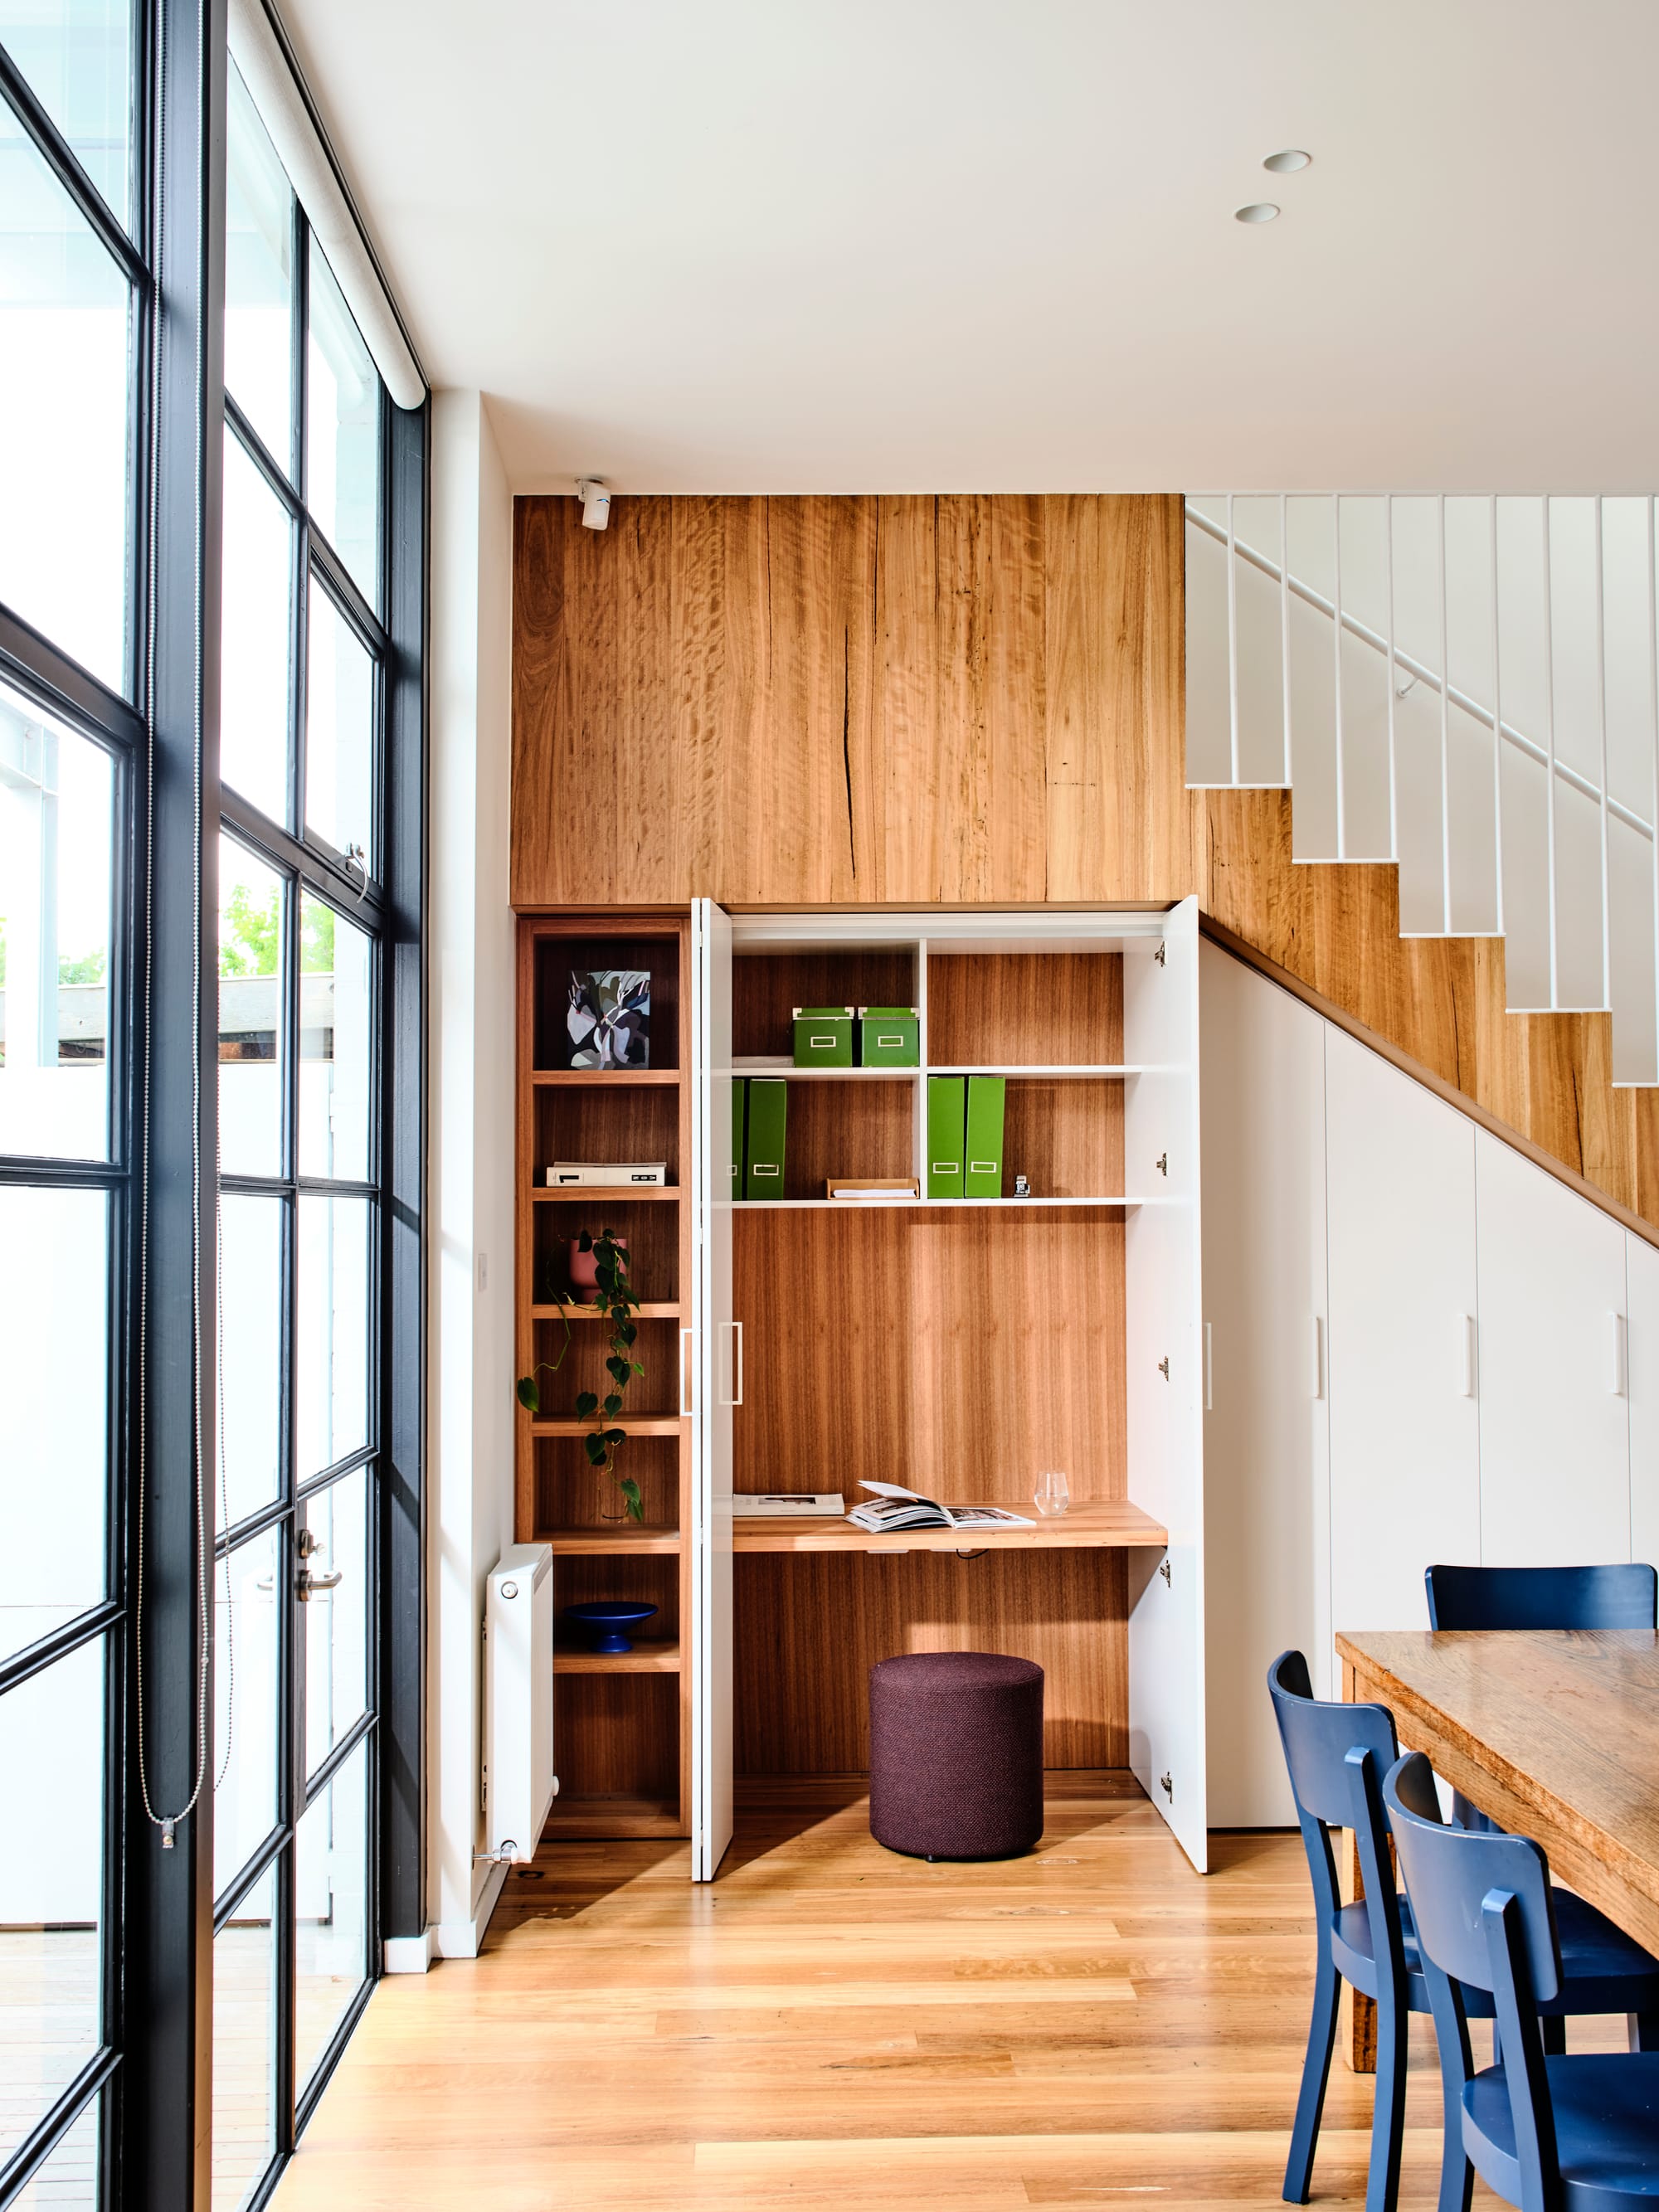 Fitzroy North Residence. Photography by Dean Bradley. Study nook with timber veneer walls, desk and shelving behind white storage doors integrated into timber staircase.